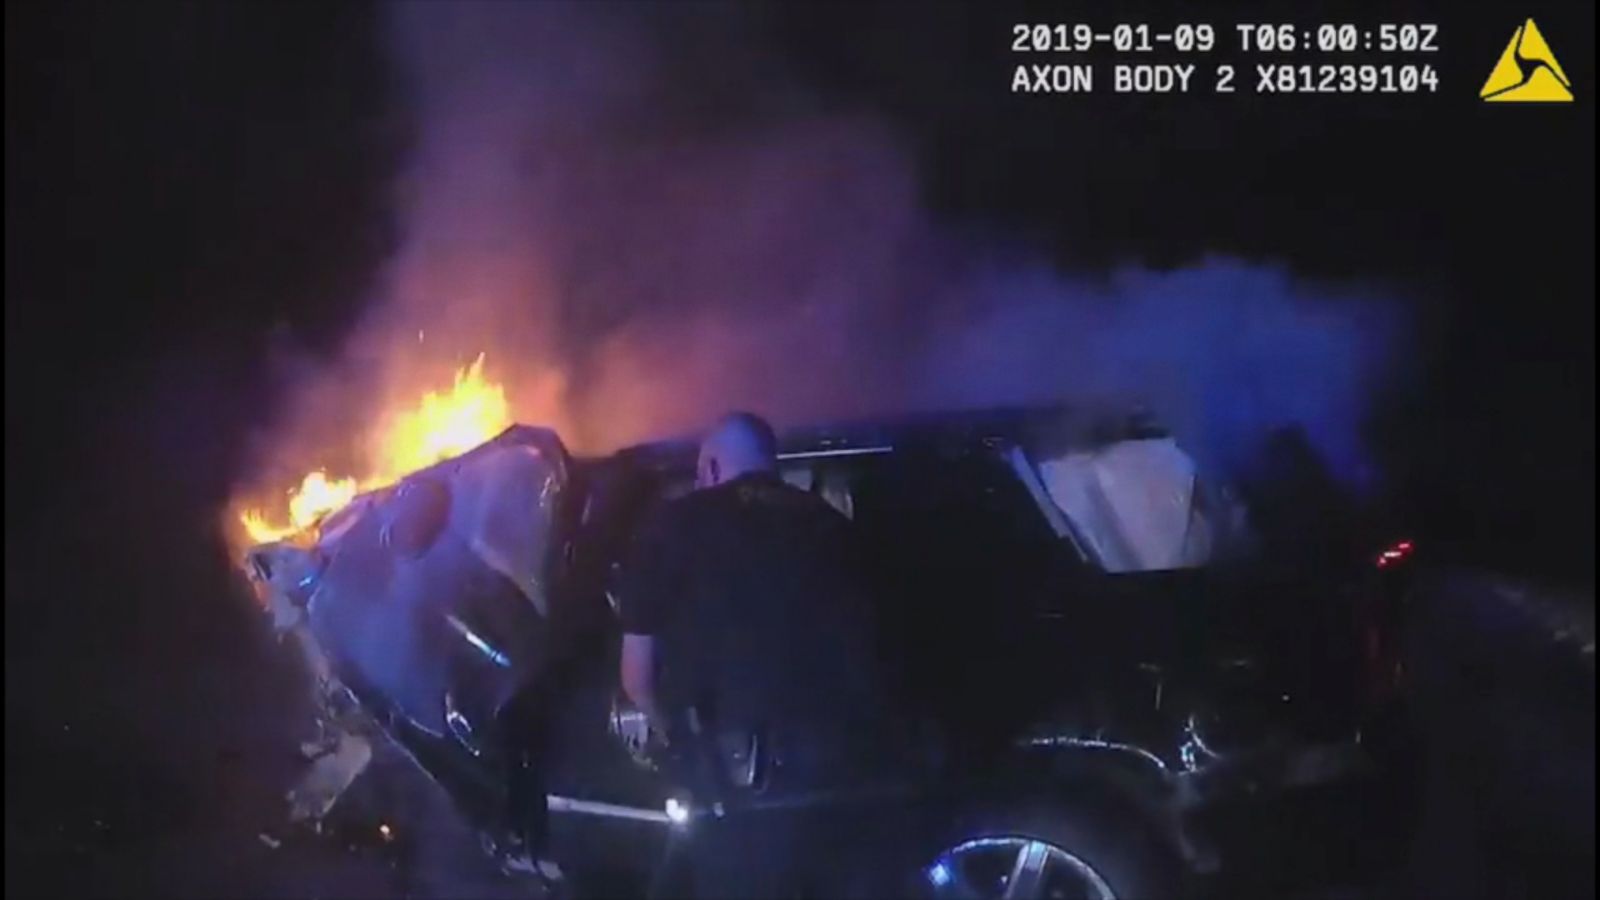 Dramatic Bodycam Footage Shows Police Pulling Man From Burning Car Good Morning America 3580